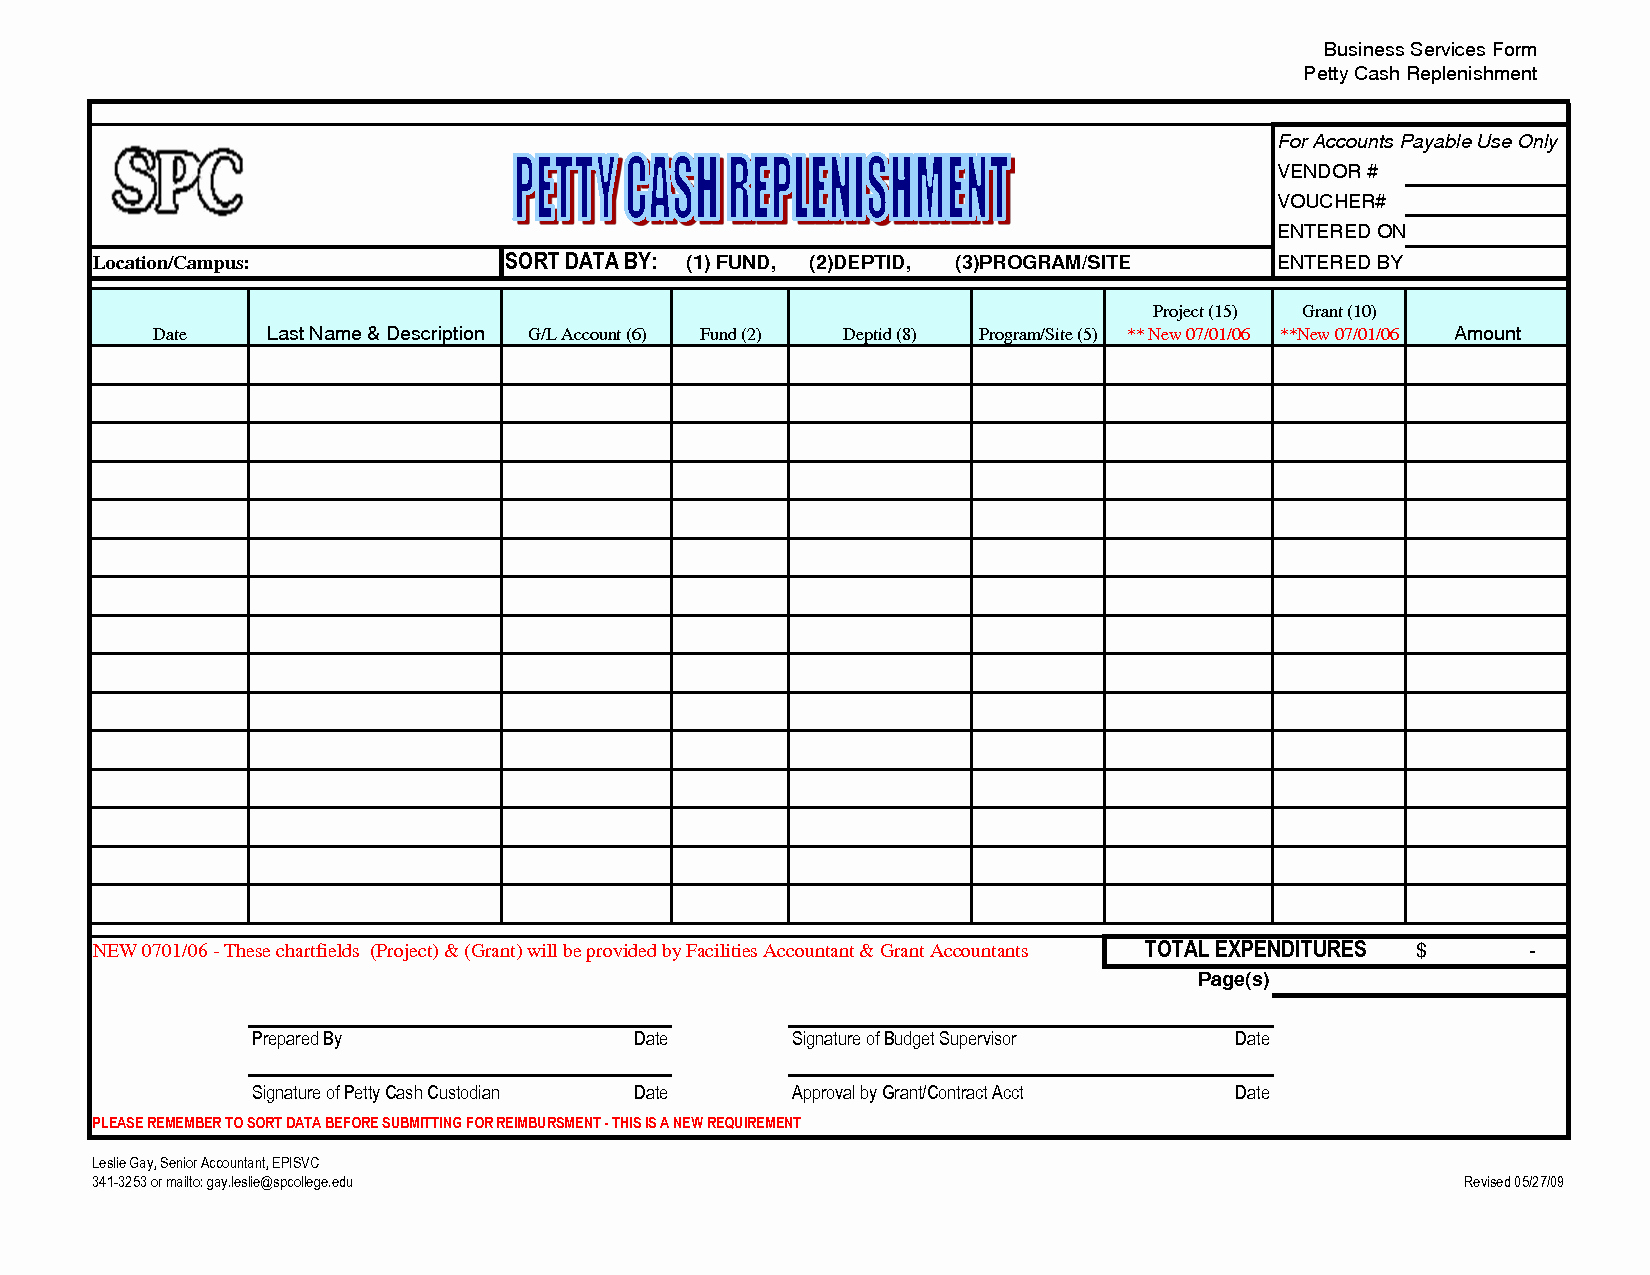 Petty Cash Request form Template Lovely Best S Of Petty Cash Replenishment form Template